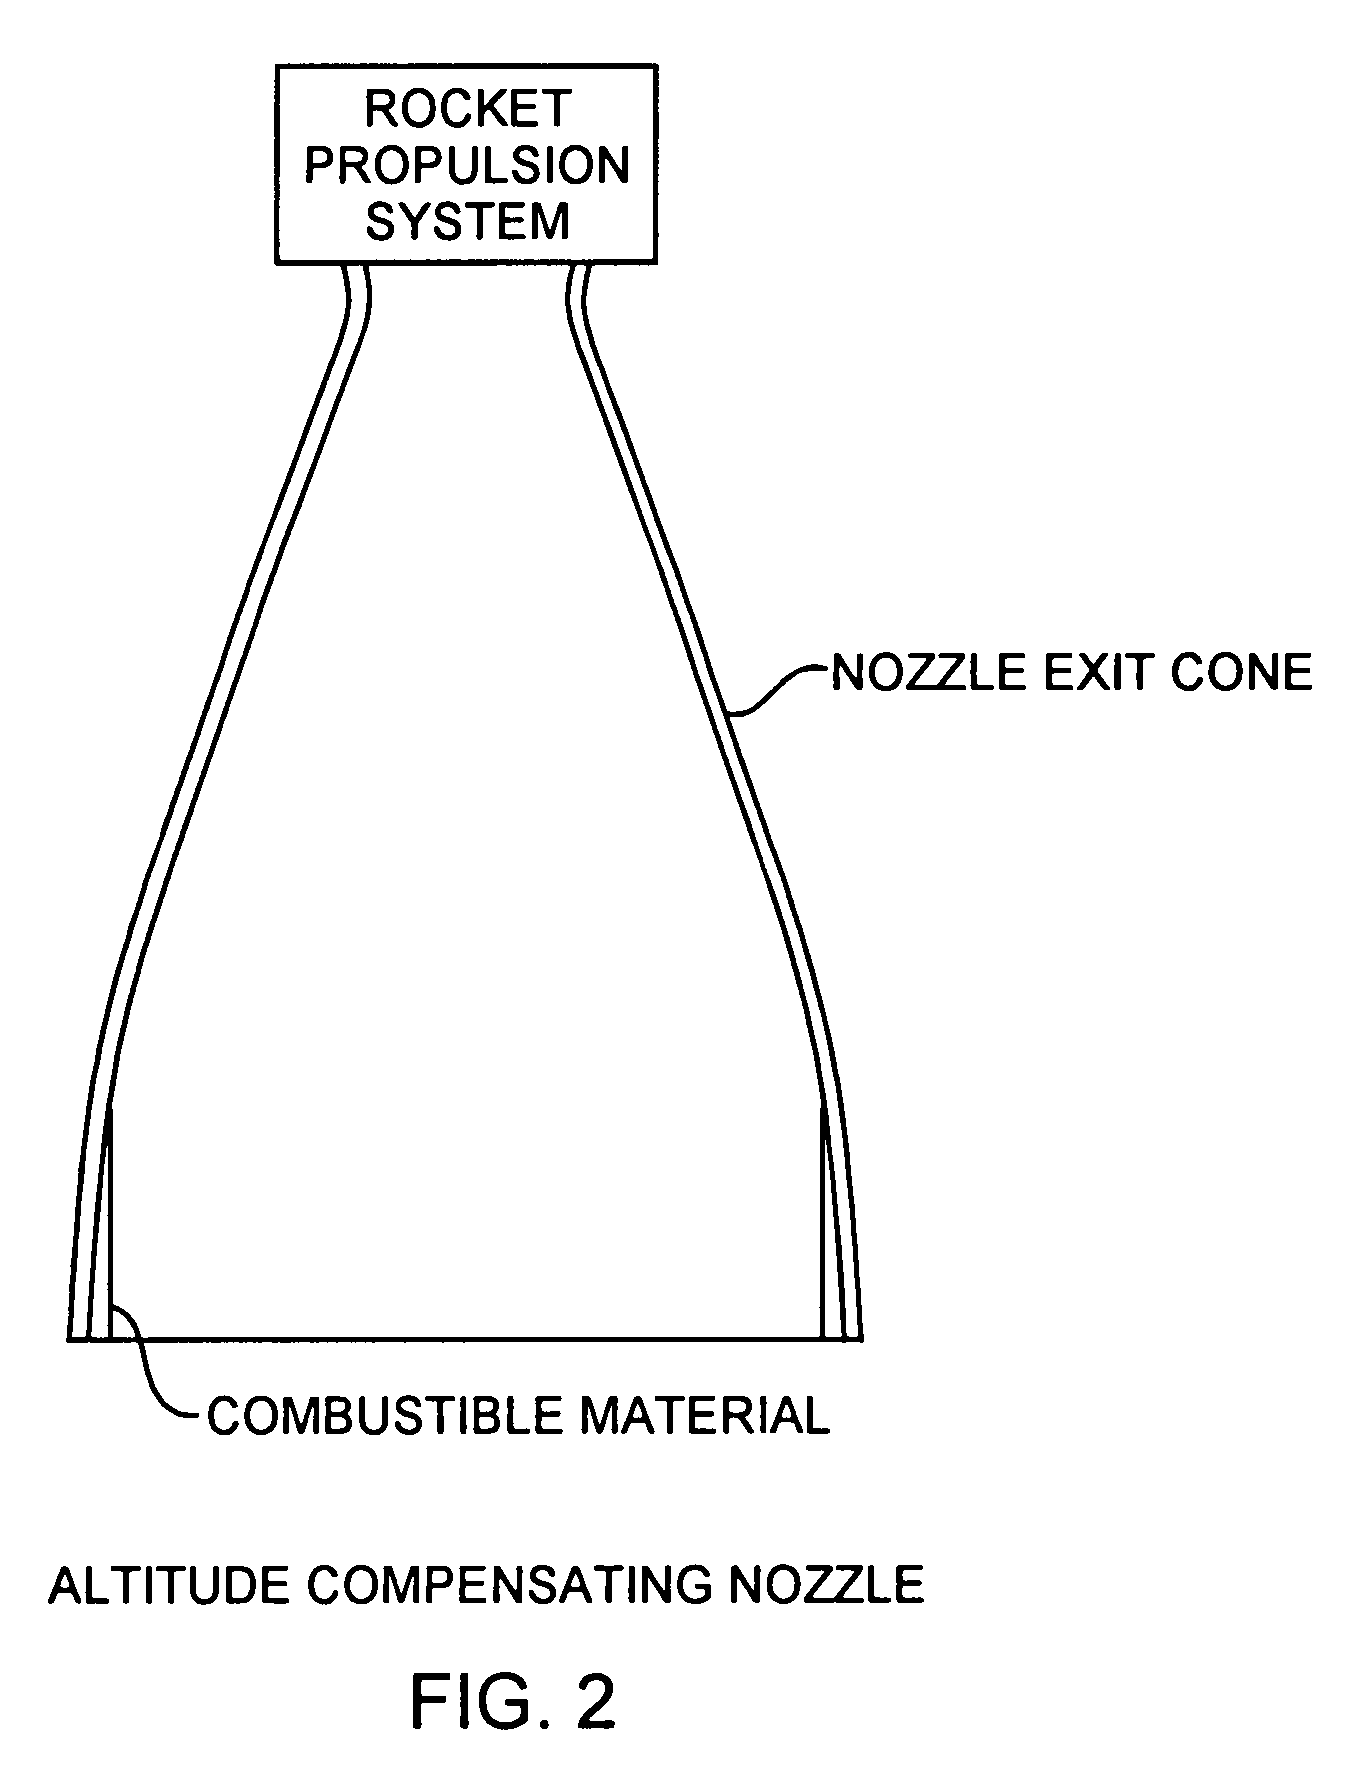 Combustible outgassing material lined altitude compensating rocket nozzle